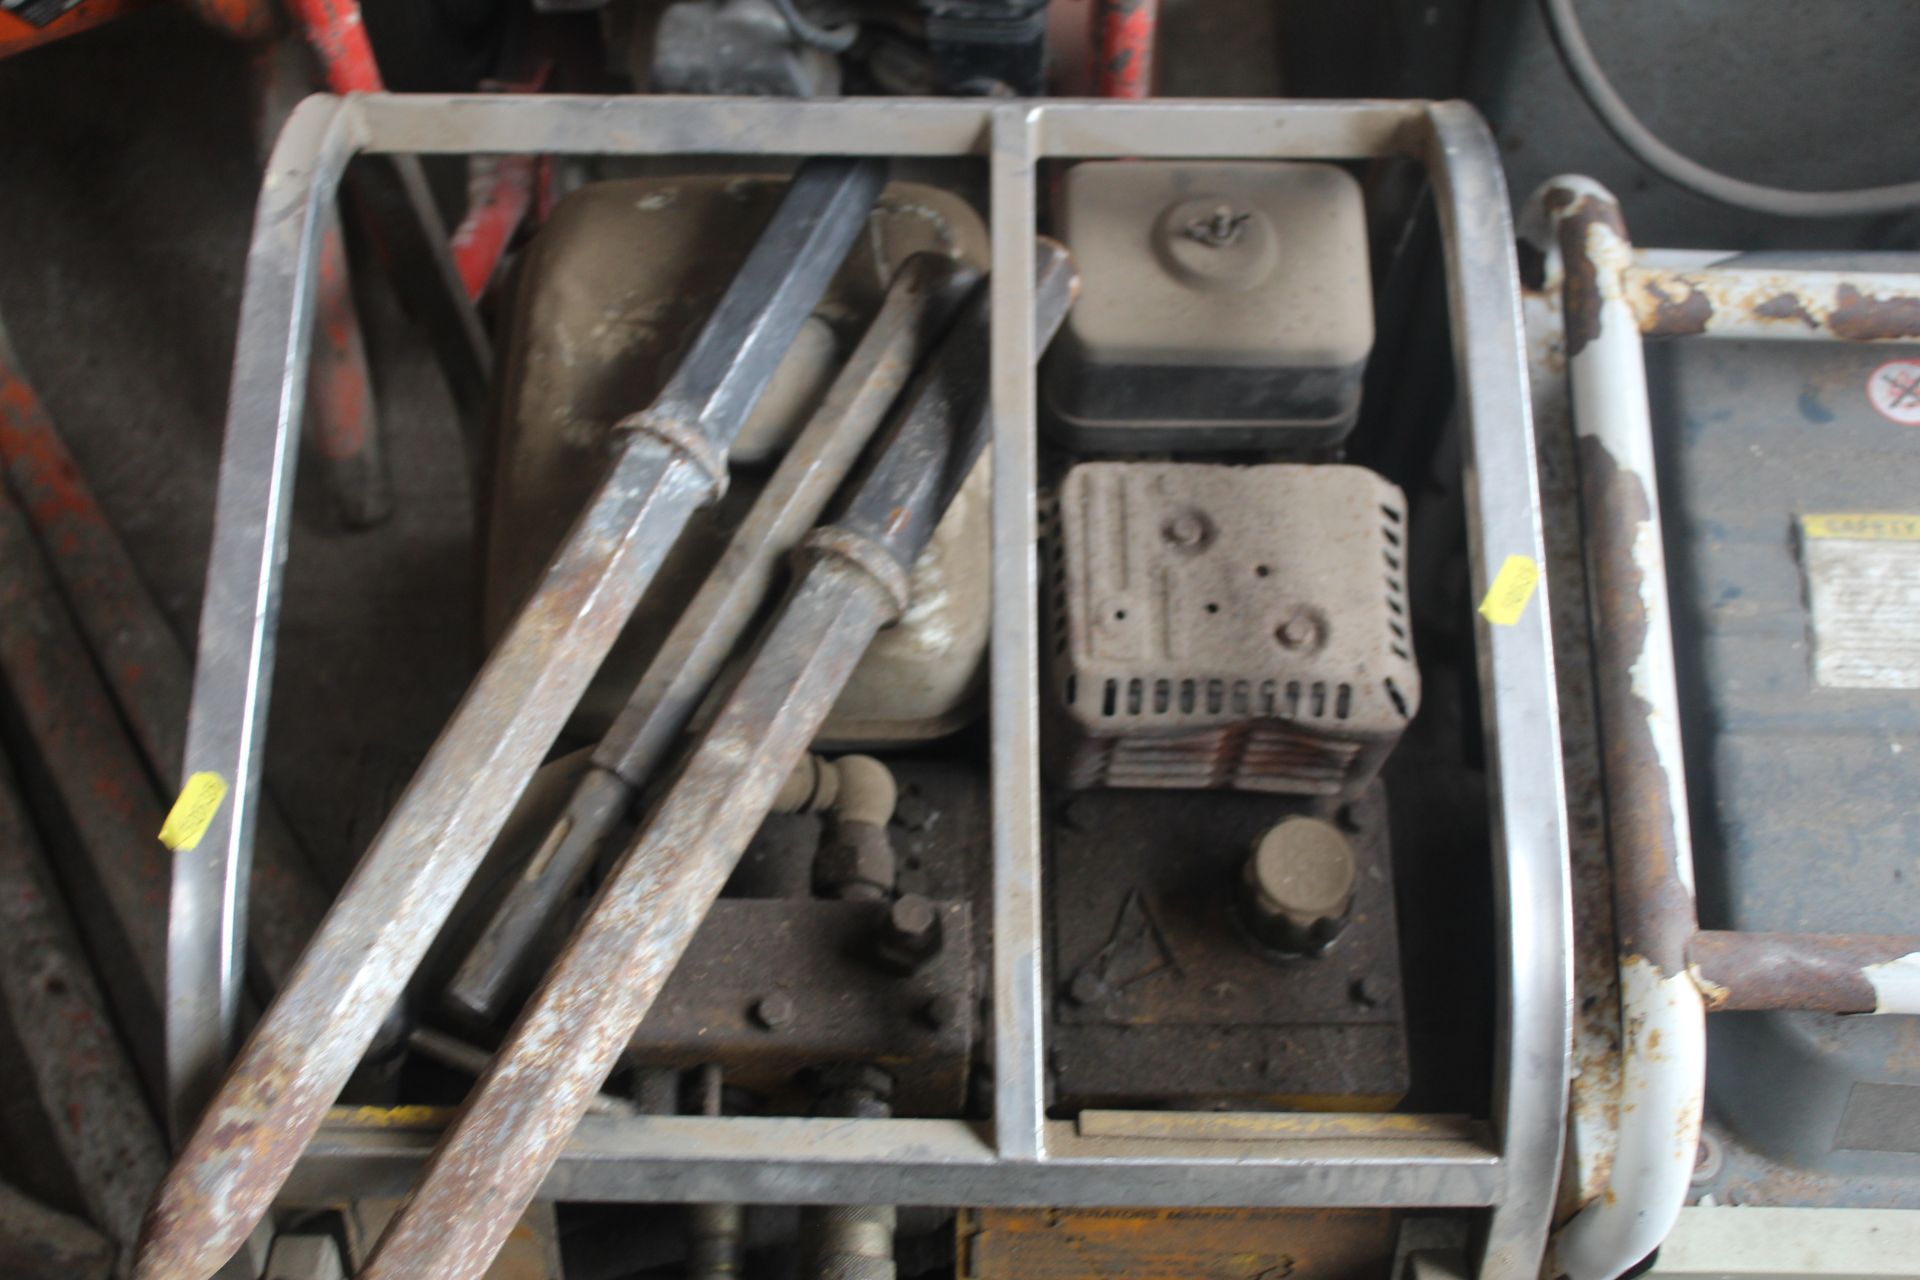 Benford hydraulic power pack, with hoses, breaker - Image 5 of 6